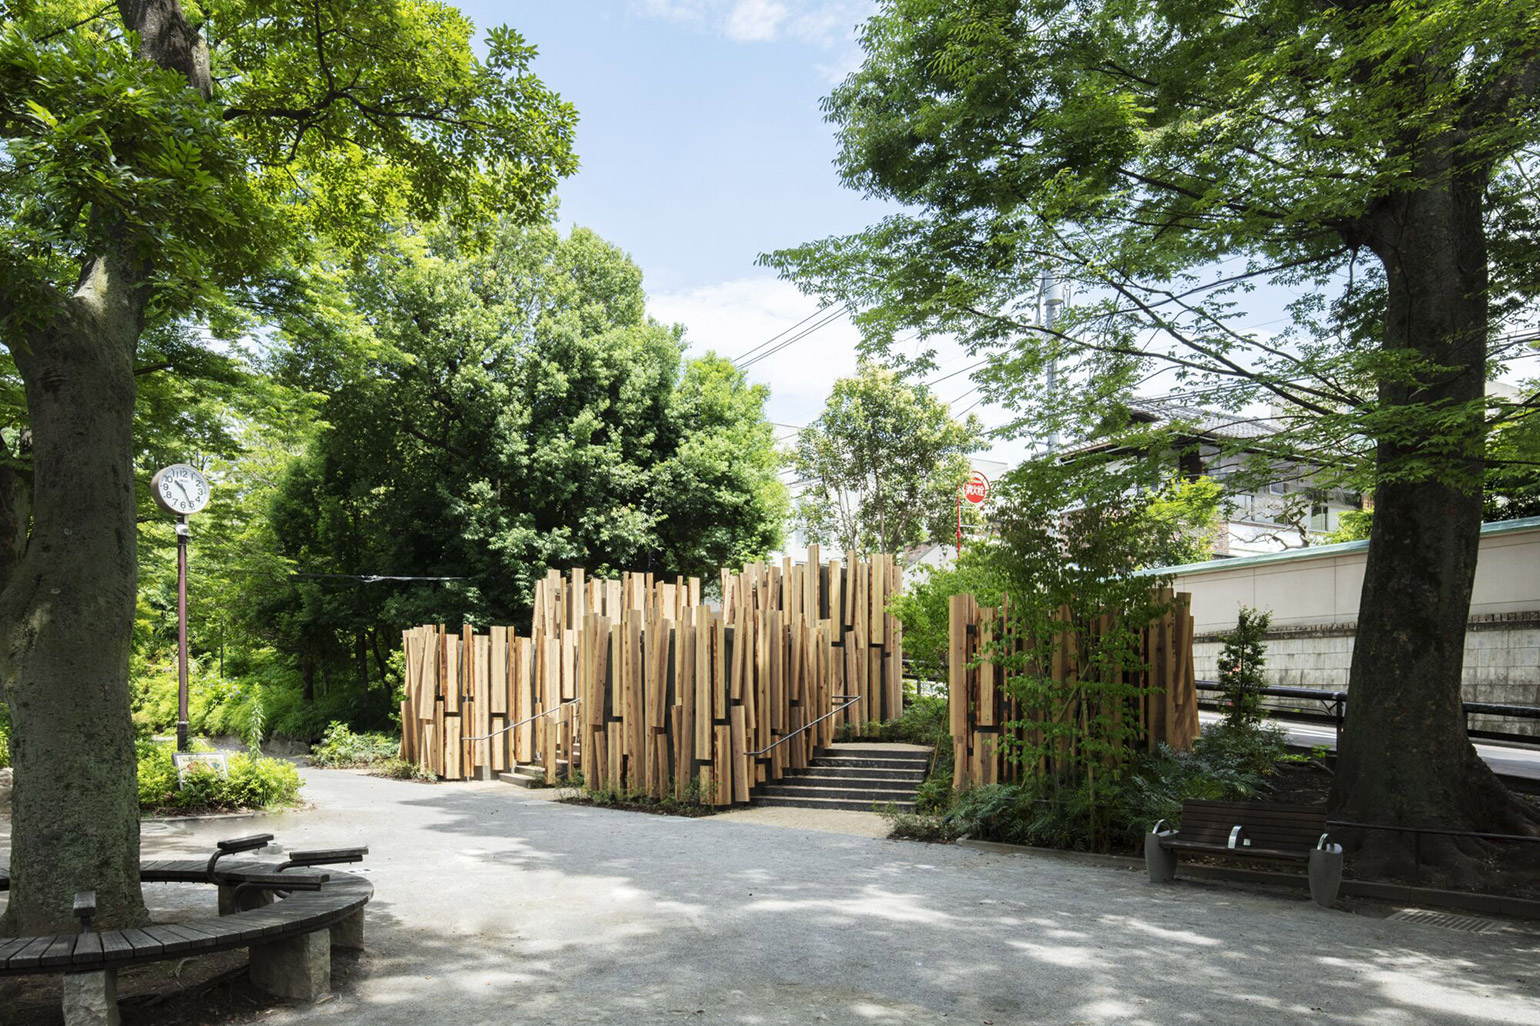 “A Walk in the Woods” — New Addition to The Tokyo Toilet Project from Kengo Kuma